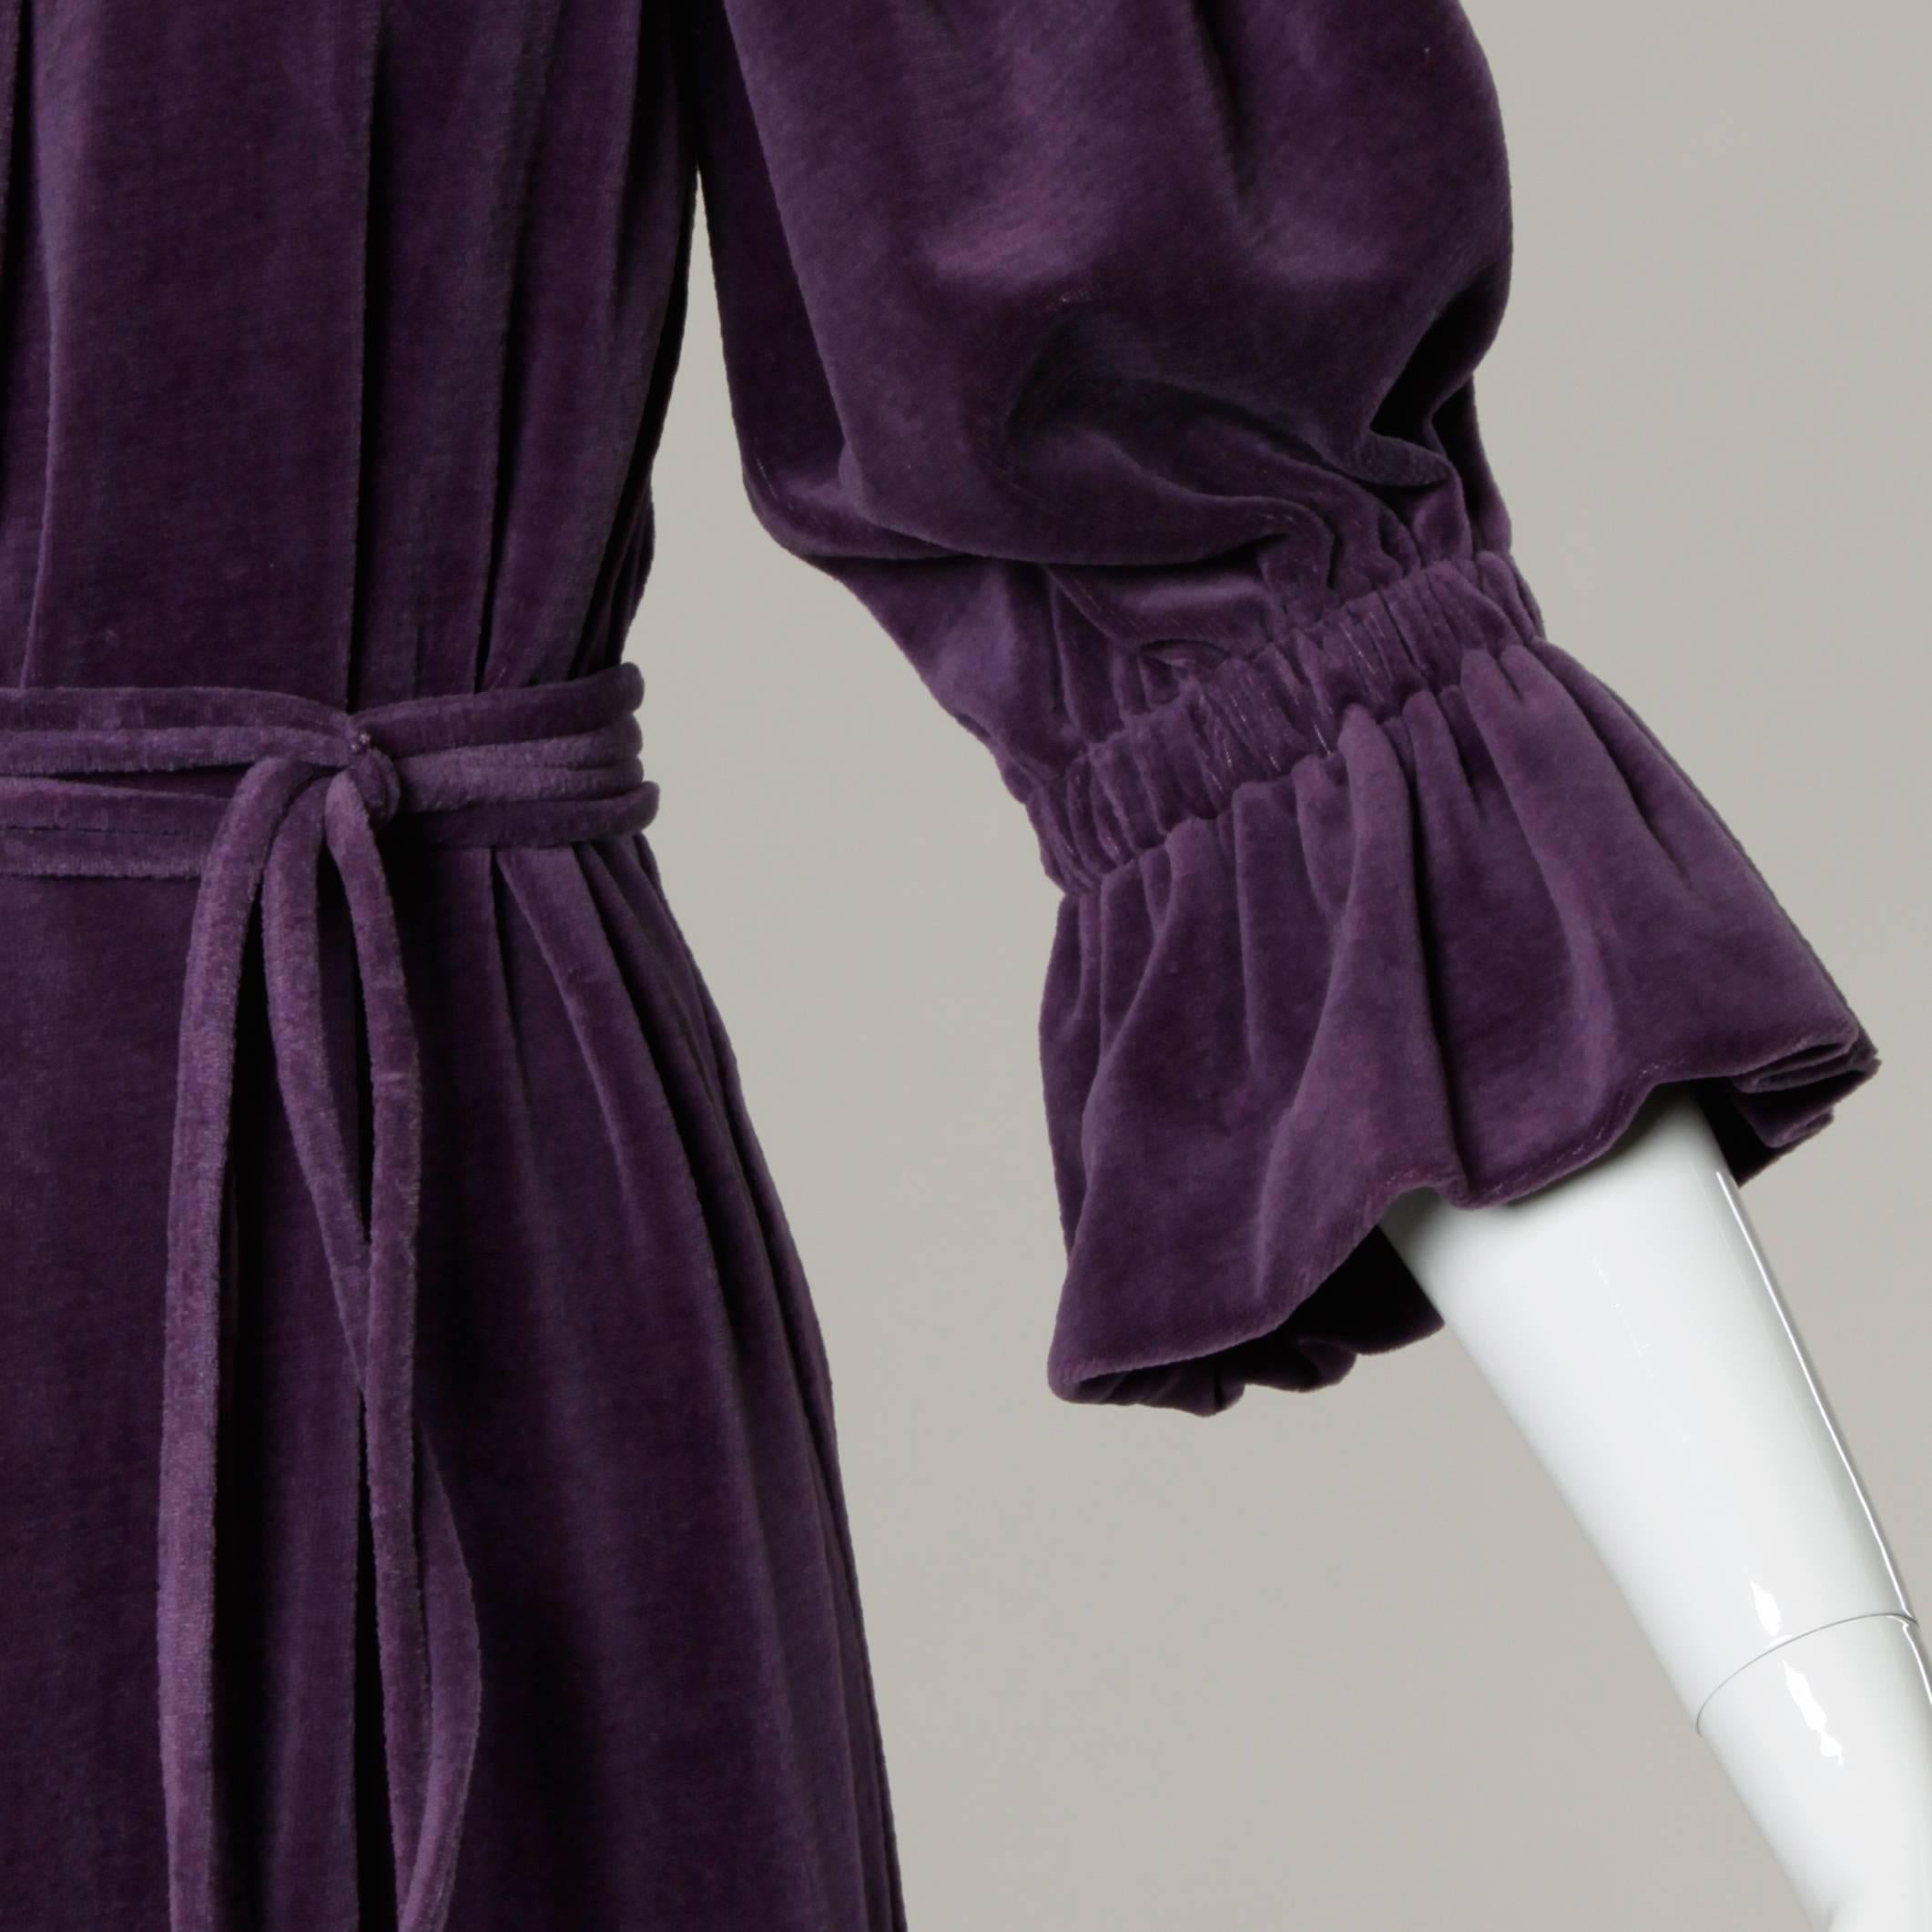 Rich purple velvet bohemian-inspired dress with a matching waist sash and full 3/4 length sleeves by Lucie Ann Beverly Hills.

Details:

Unlined
Matching Waist Tie
No Closure
Marked Size: Not Marked
Estimated Size: M
Color: Purple 
Fabric: